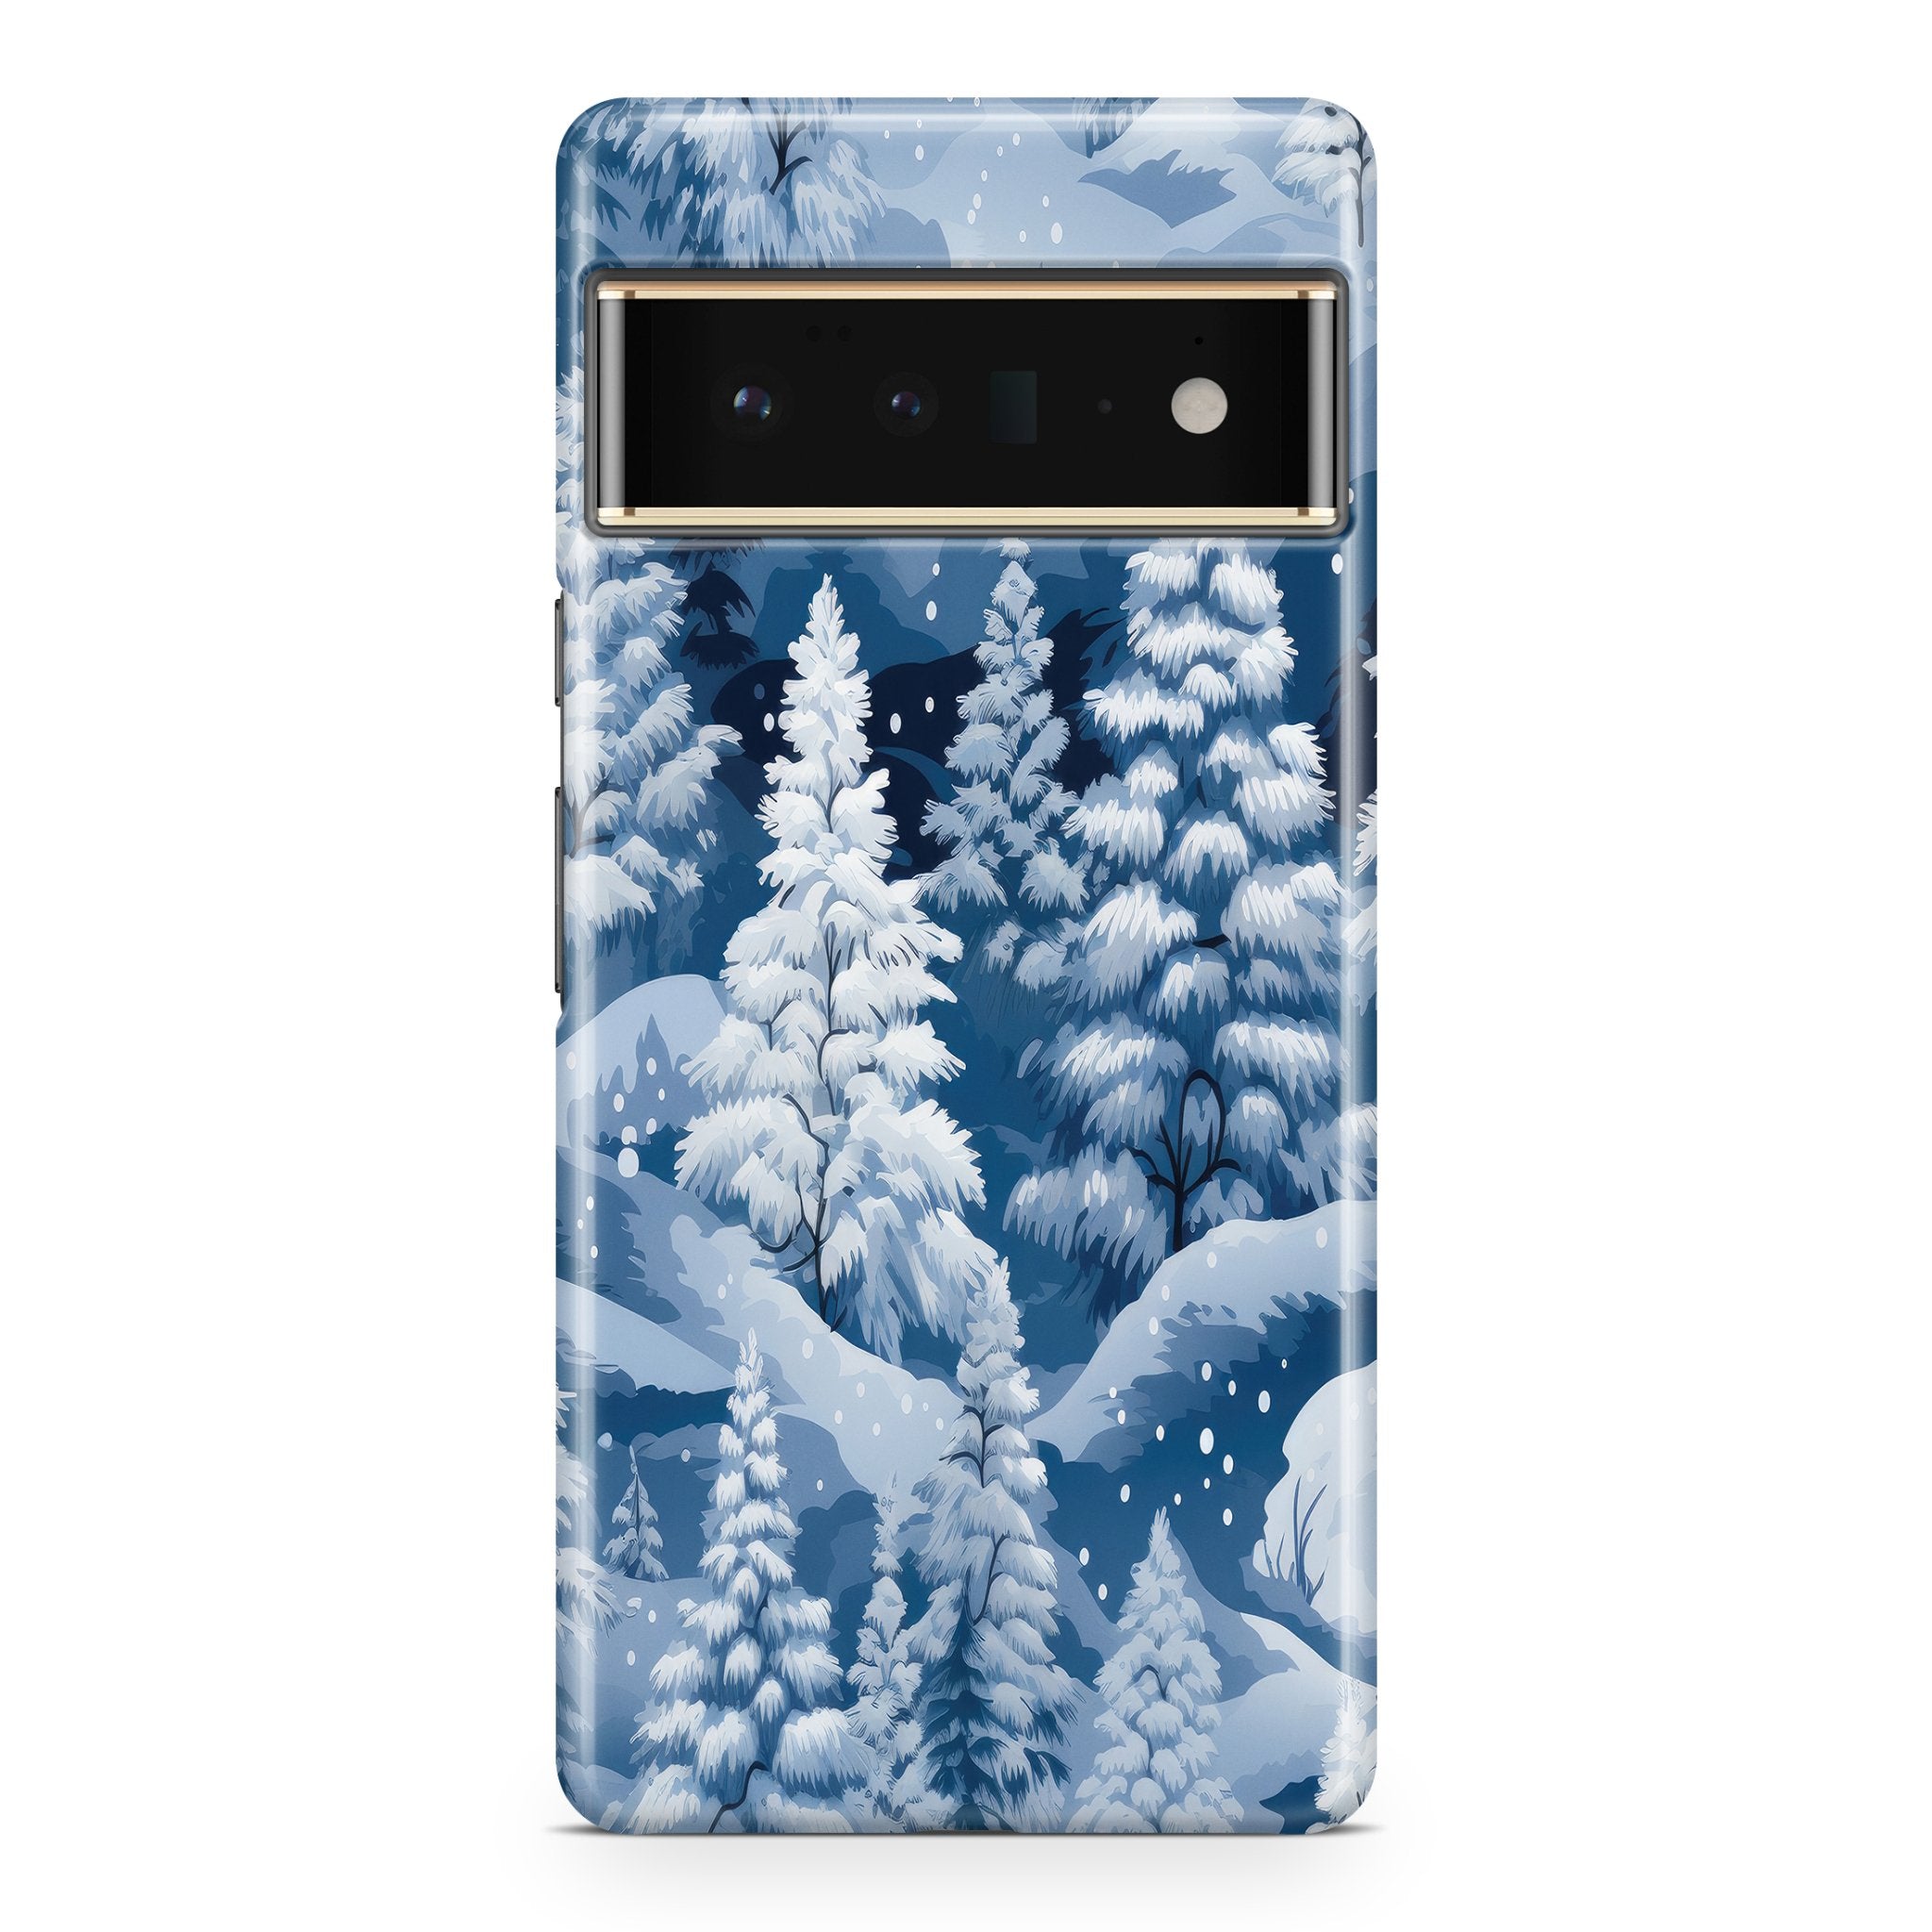 Snowy Symphony - Google phone case designs by CaseSwagger